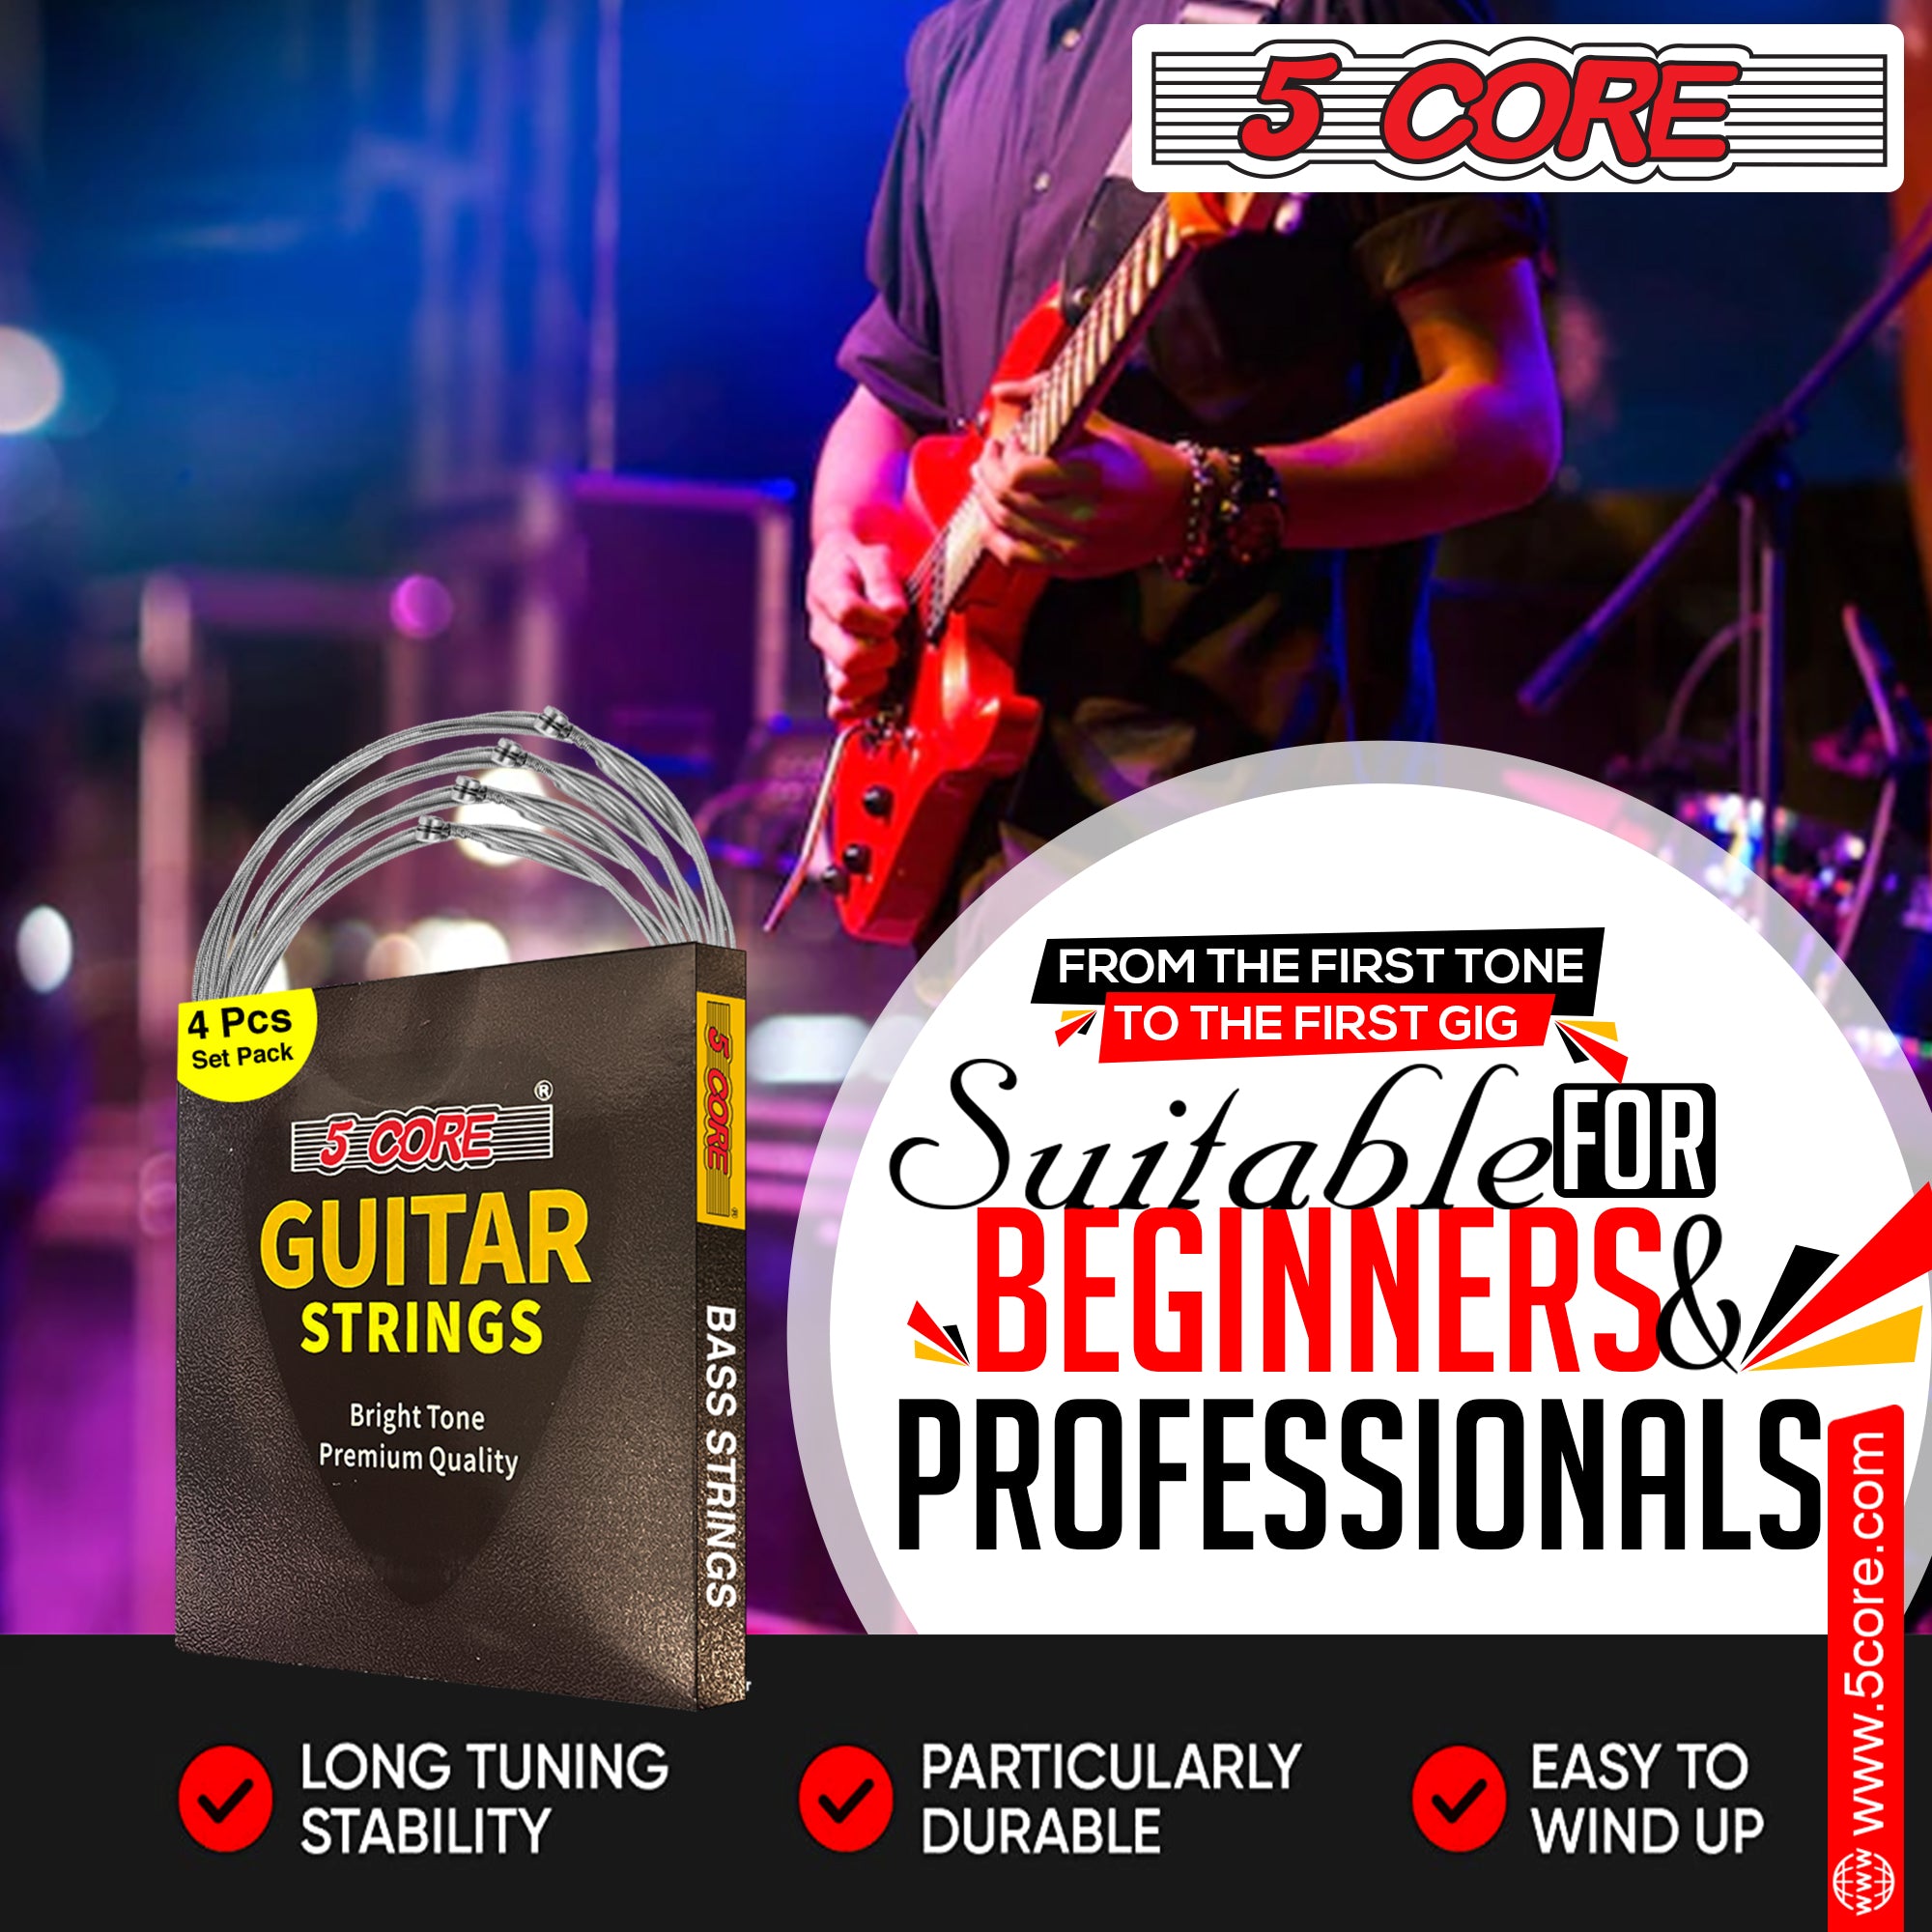 5 Core Bass Guitar Strings • 0.010-.048 Gauge • w Deep Bright Tone for 6 String Electric Guitars